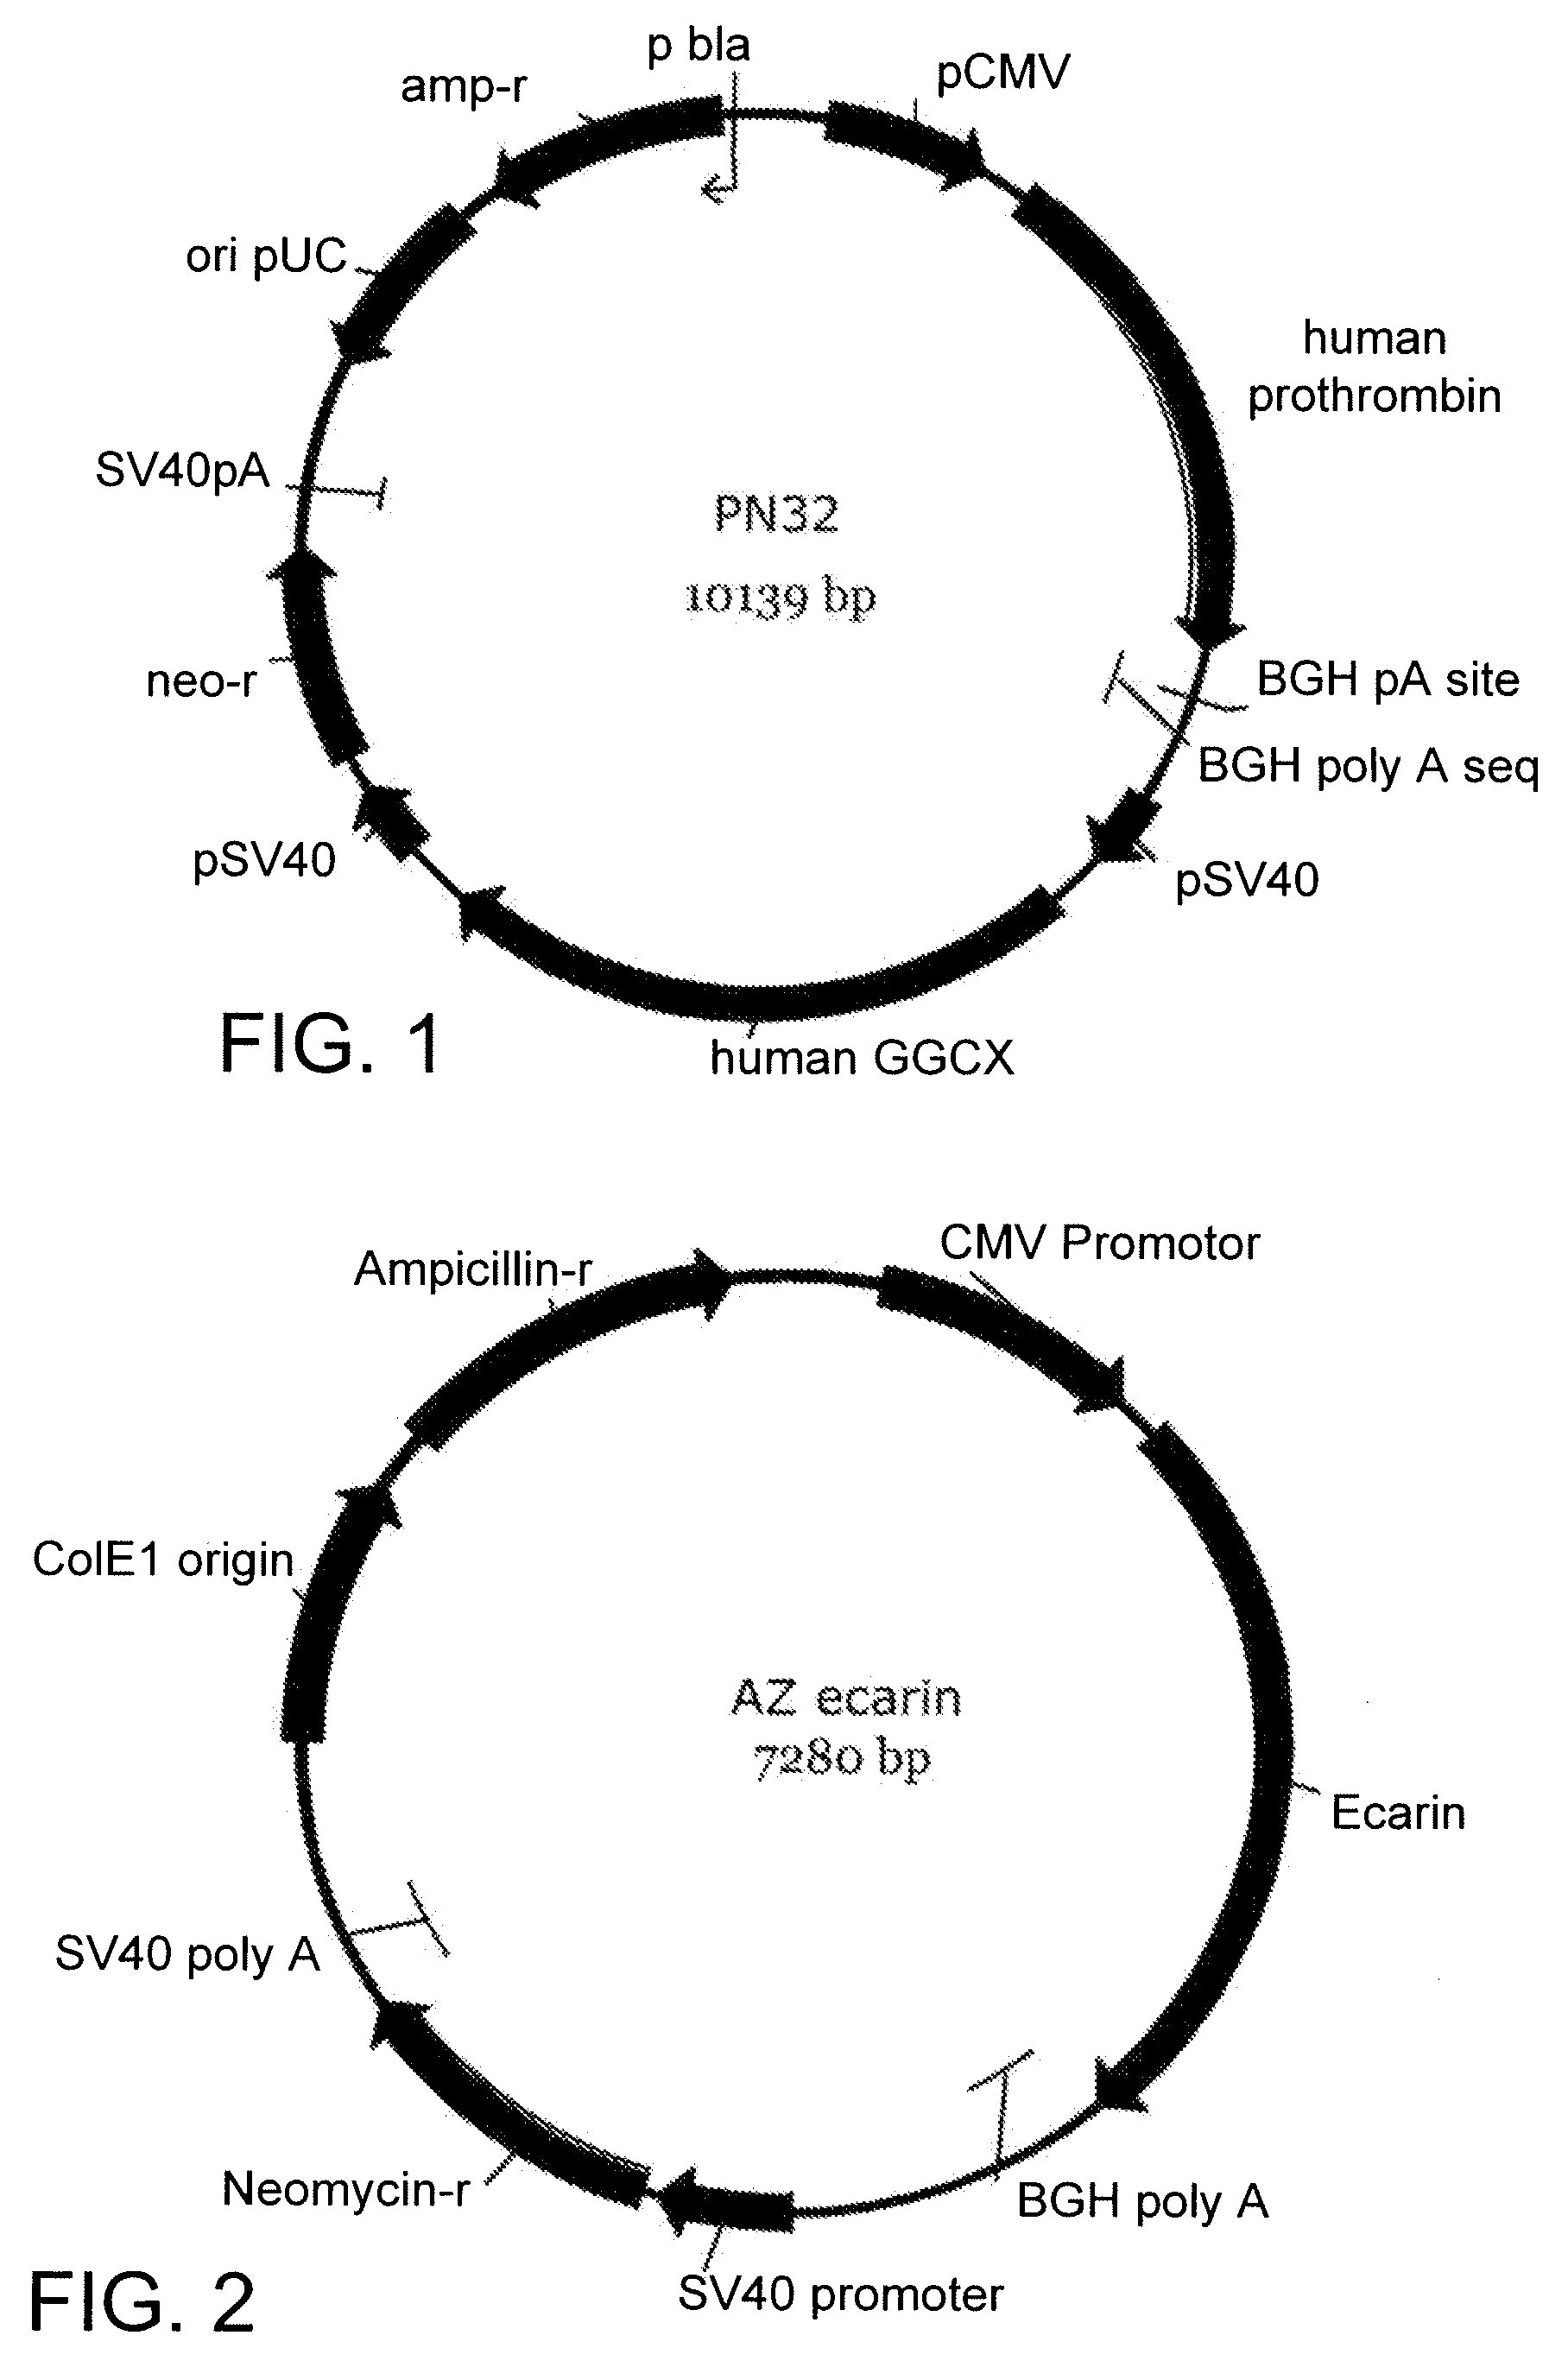 Method for production of recombinant human thrombin